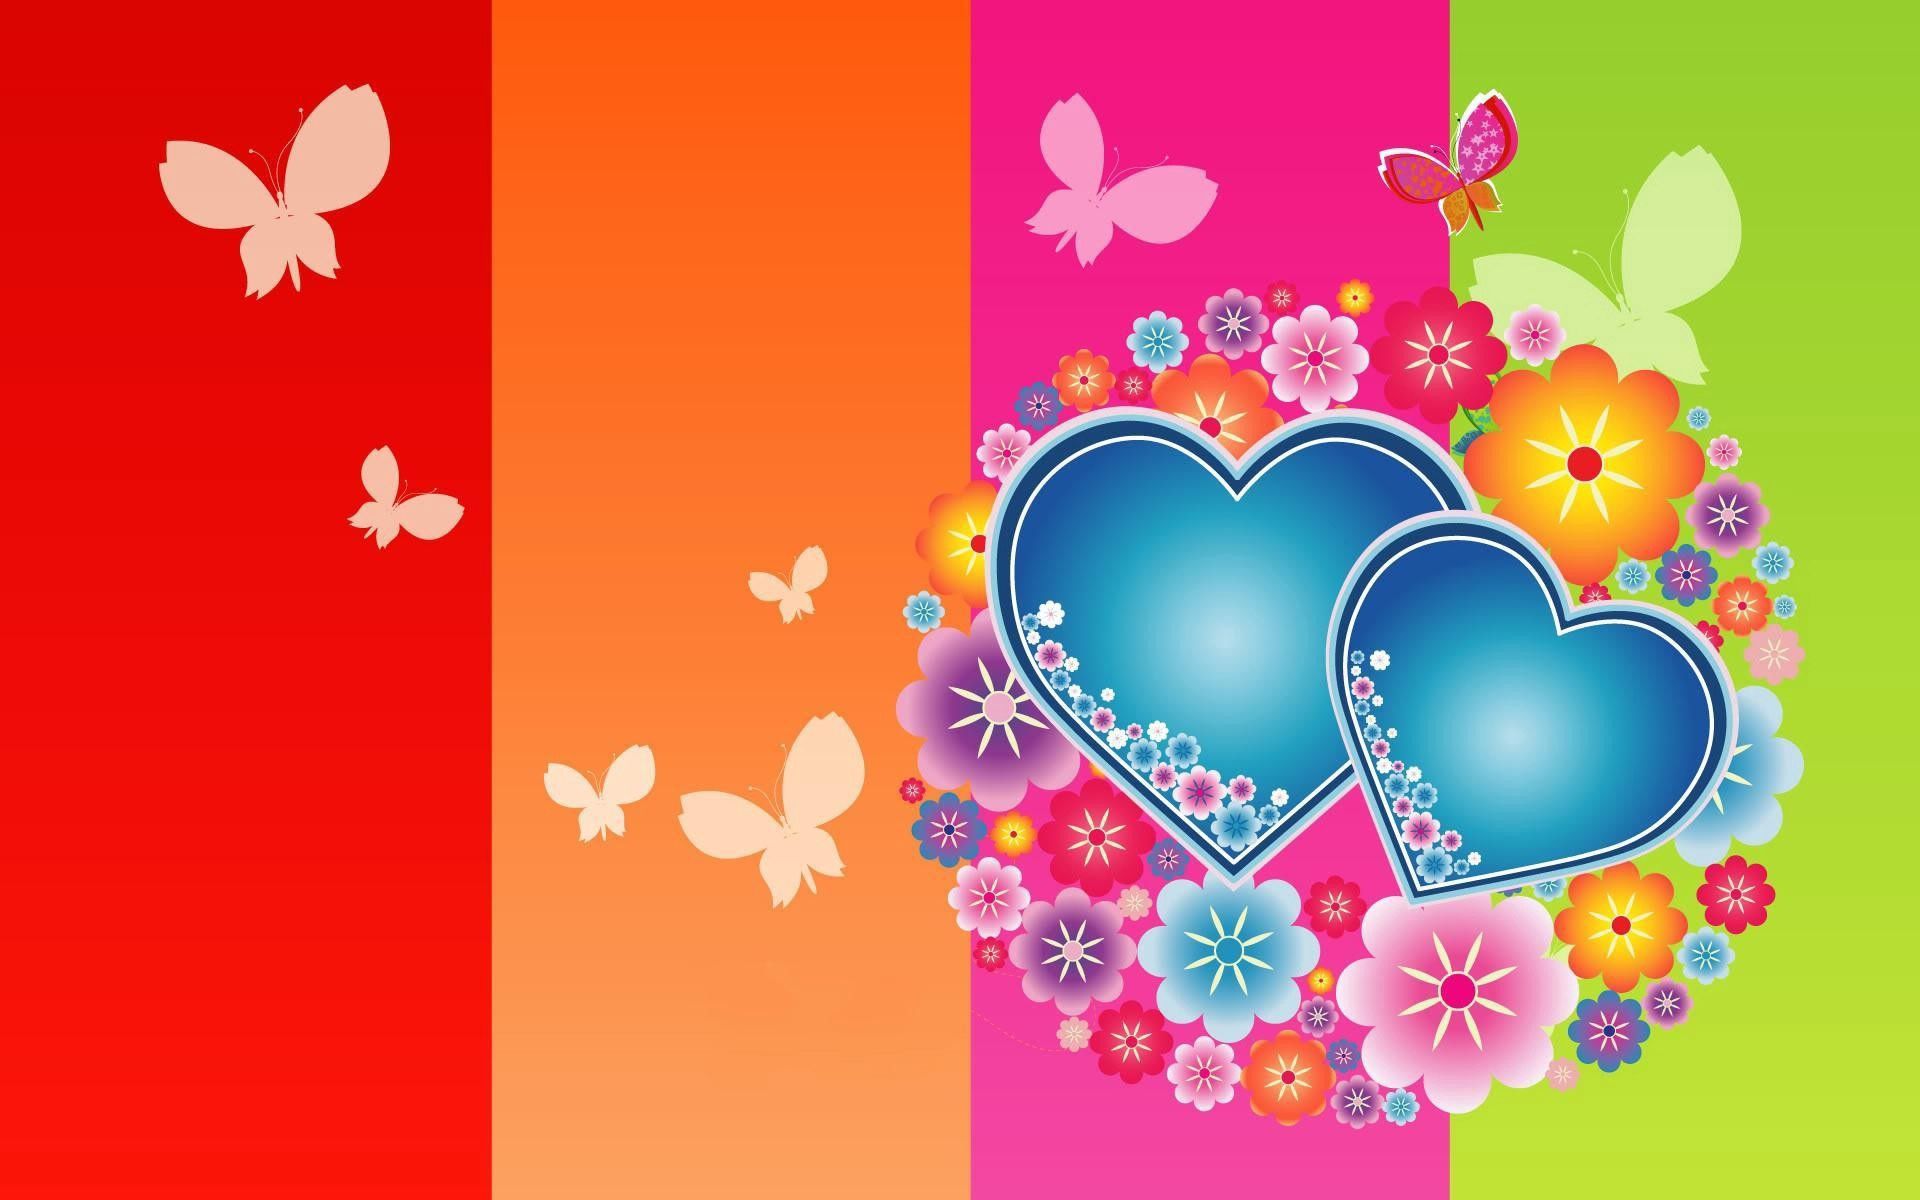 Cool Hearts Backgrounds